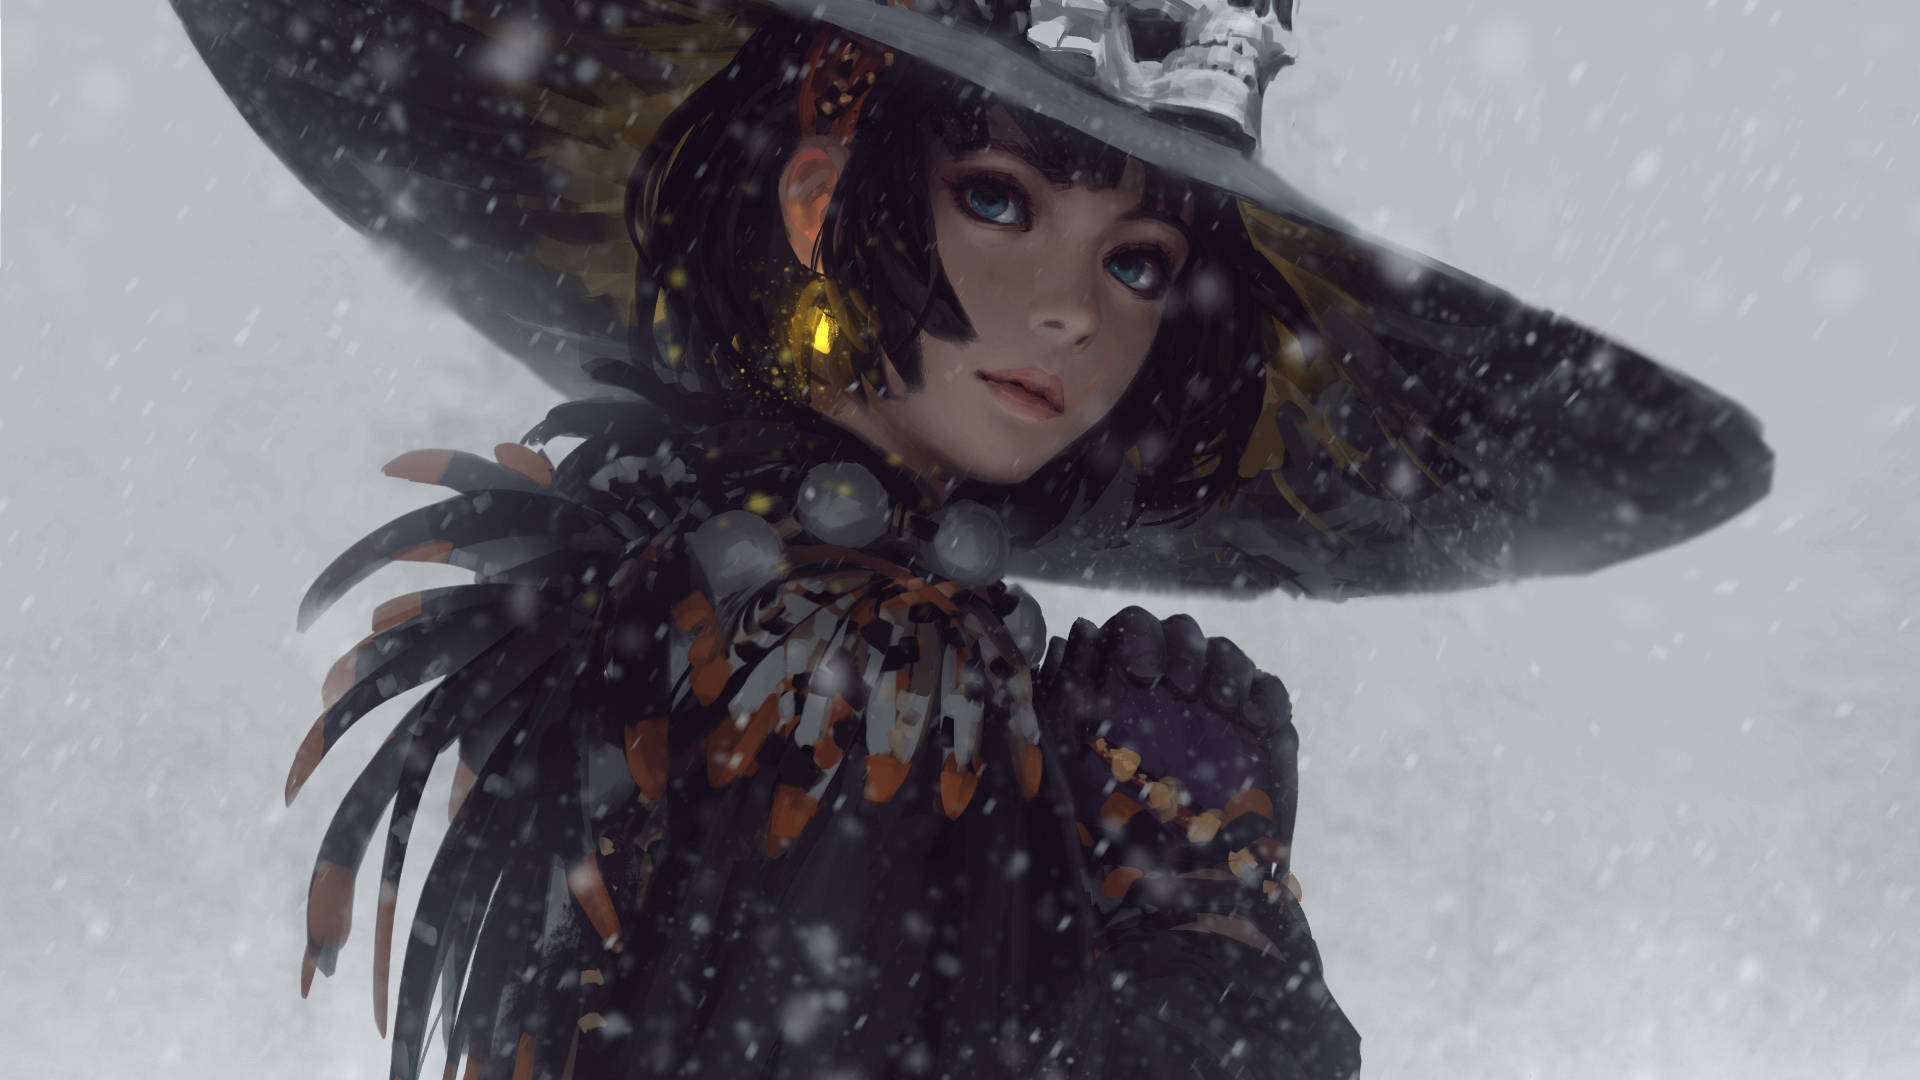 Witchy Anime Girl In Snow Wallpaper